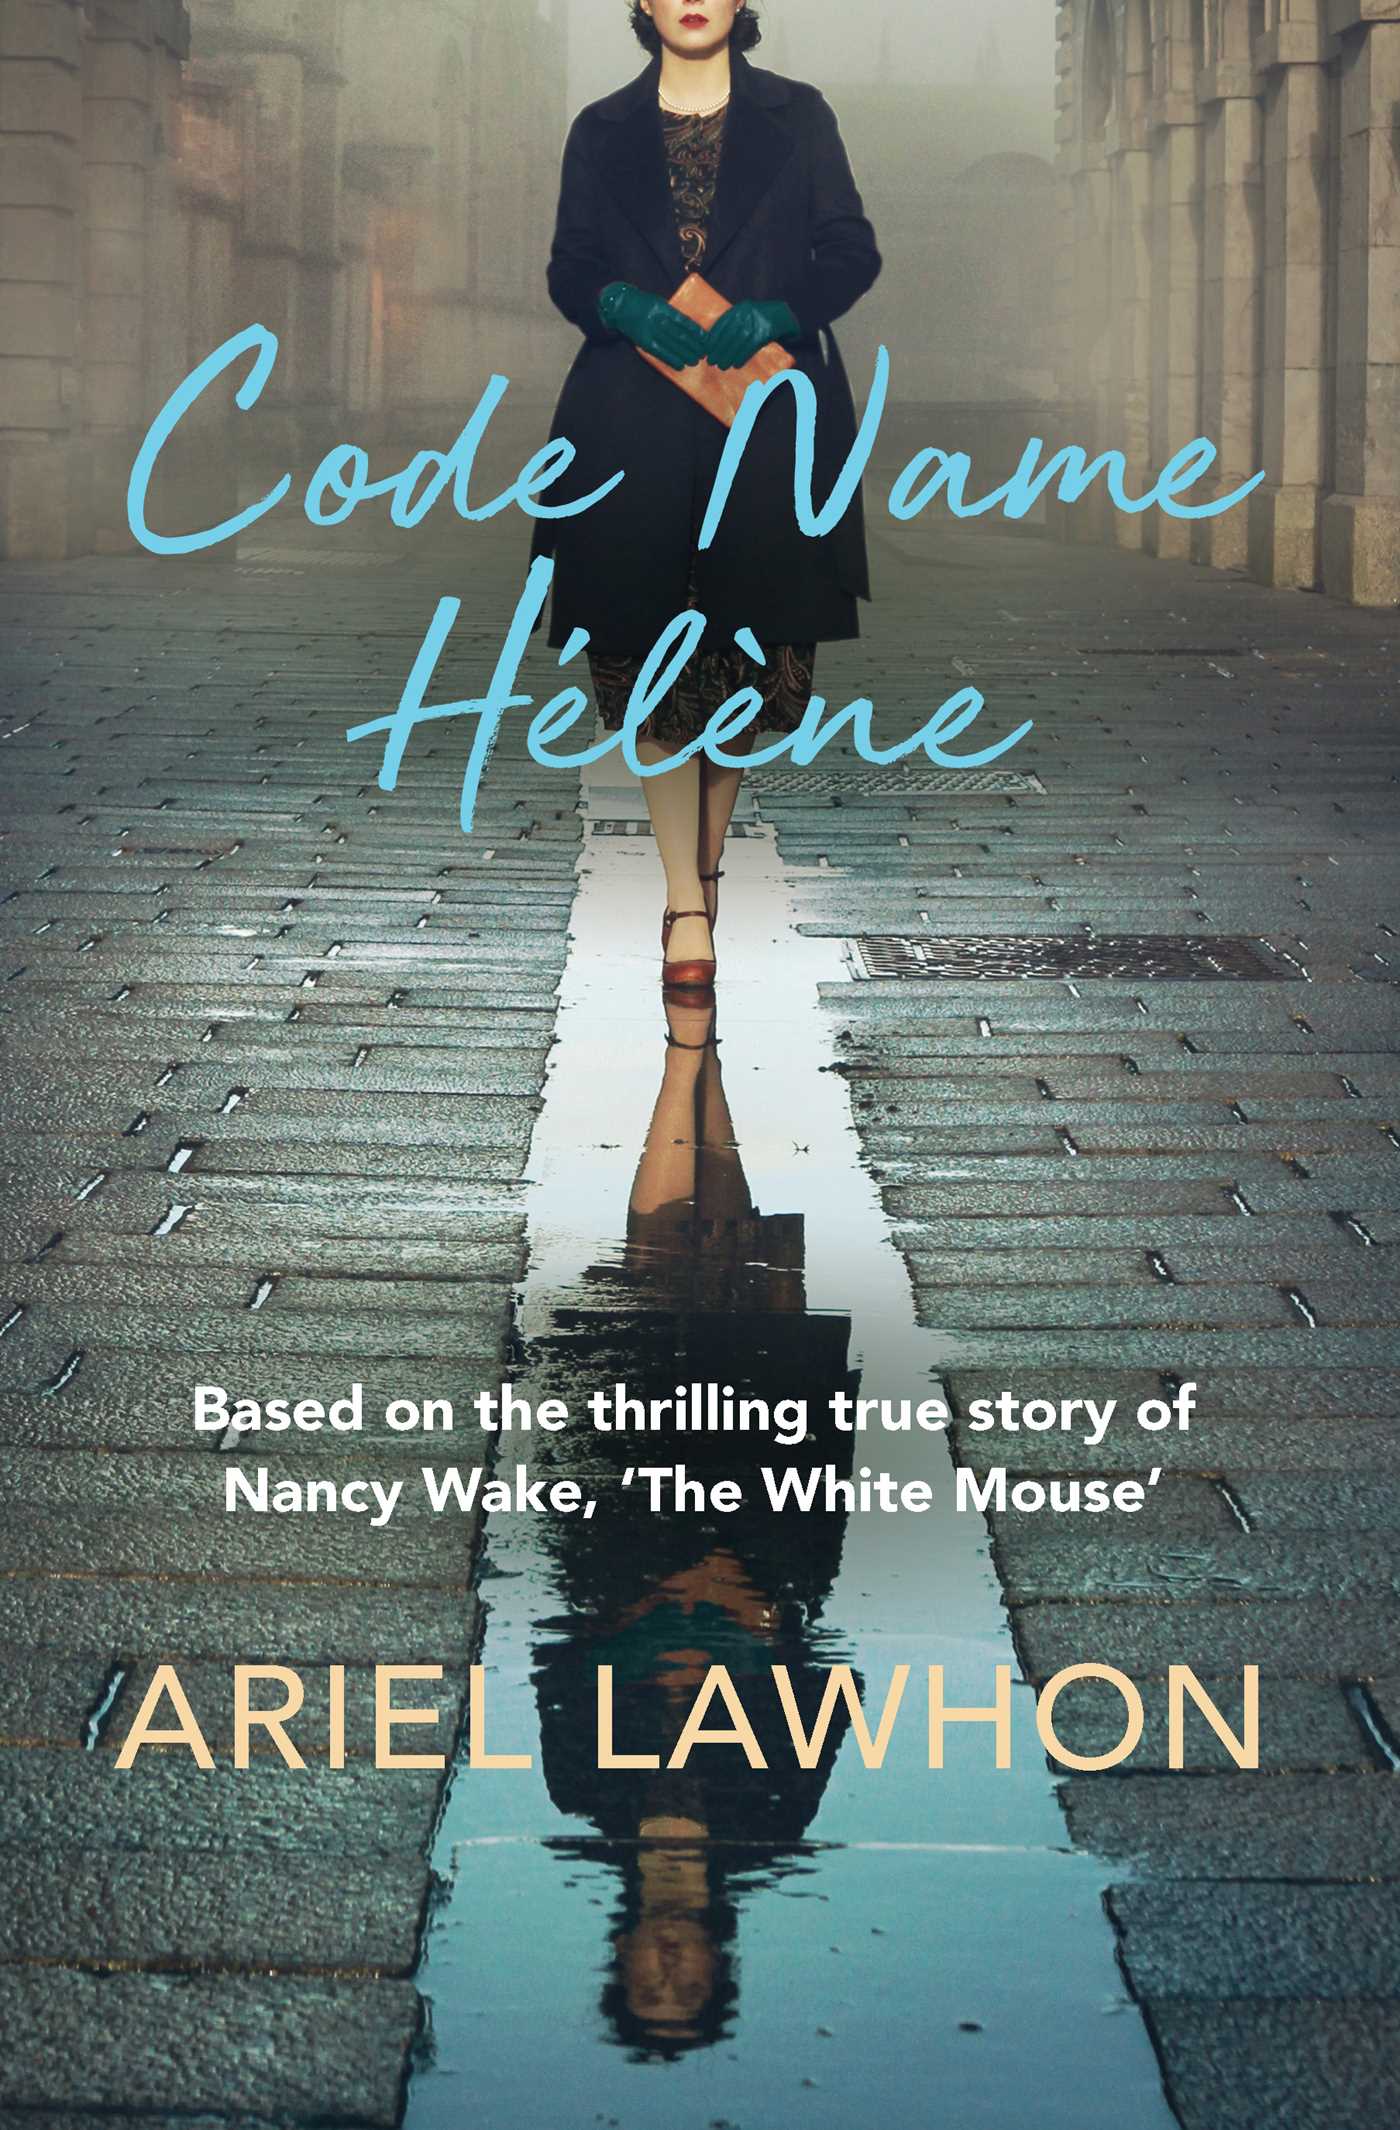 Code Name Helene by Ariel Lawhon - City Books & Lotto